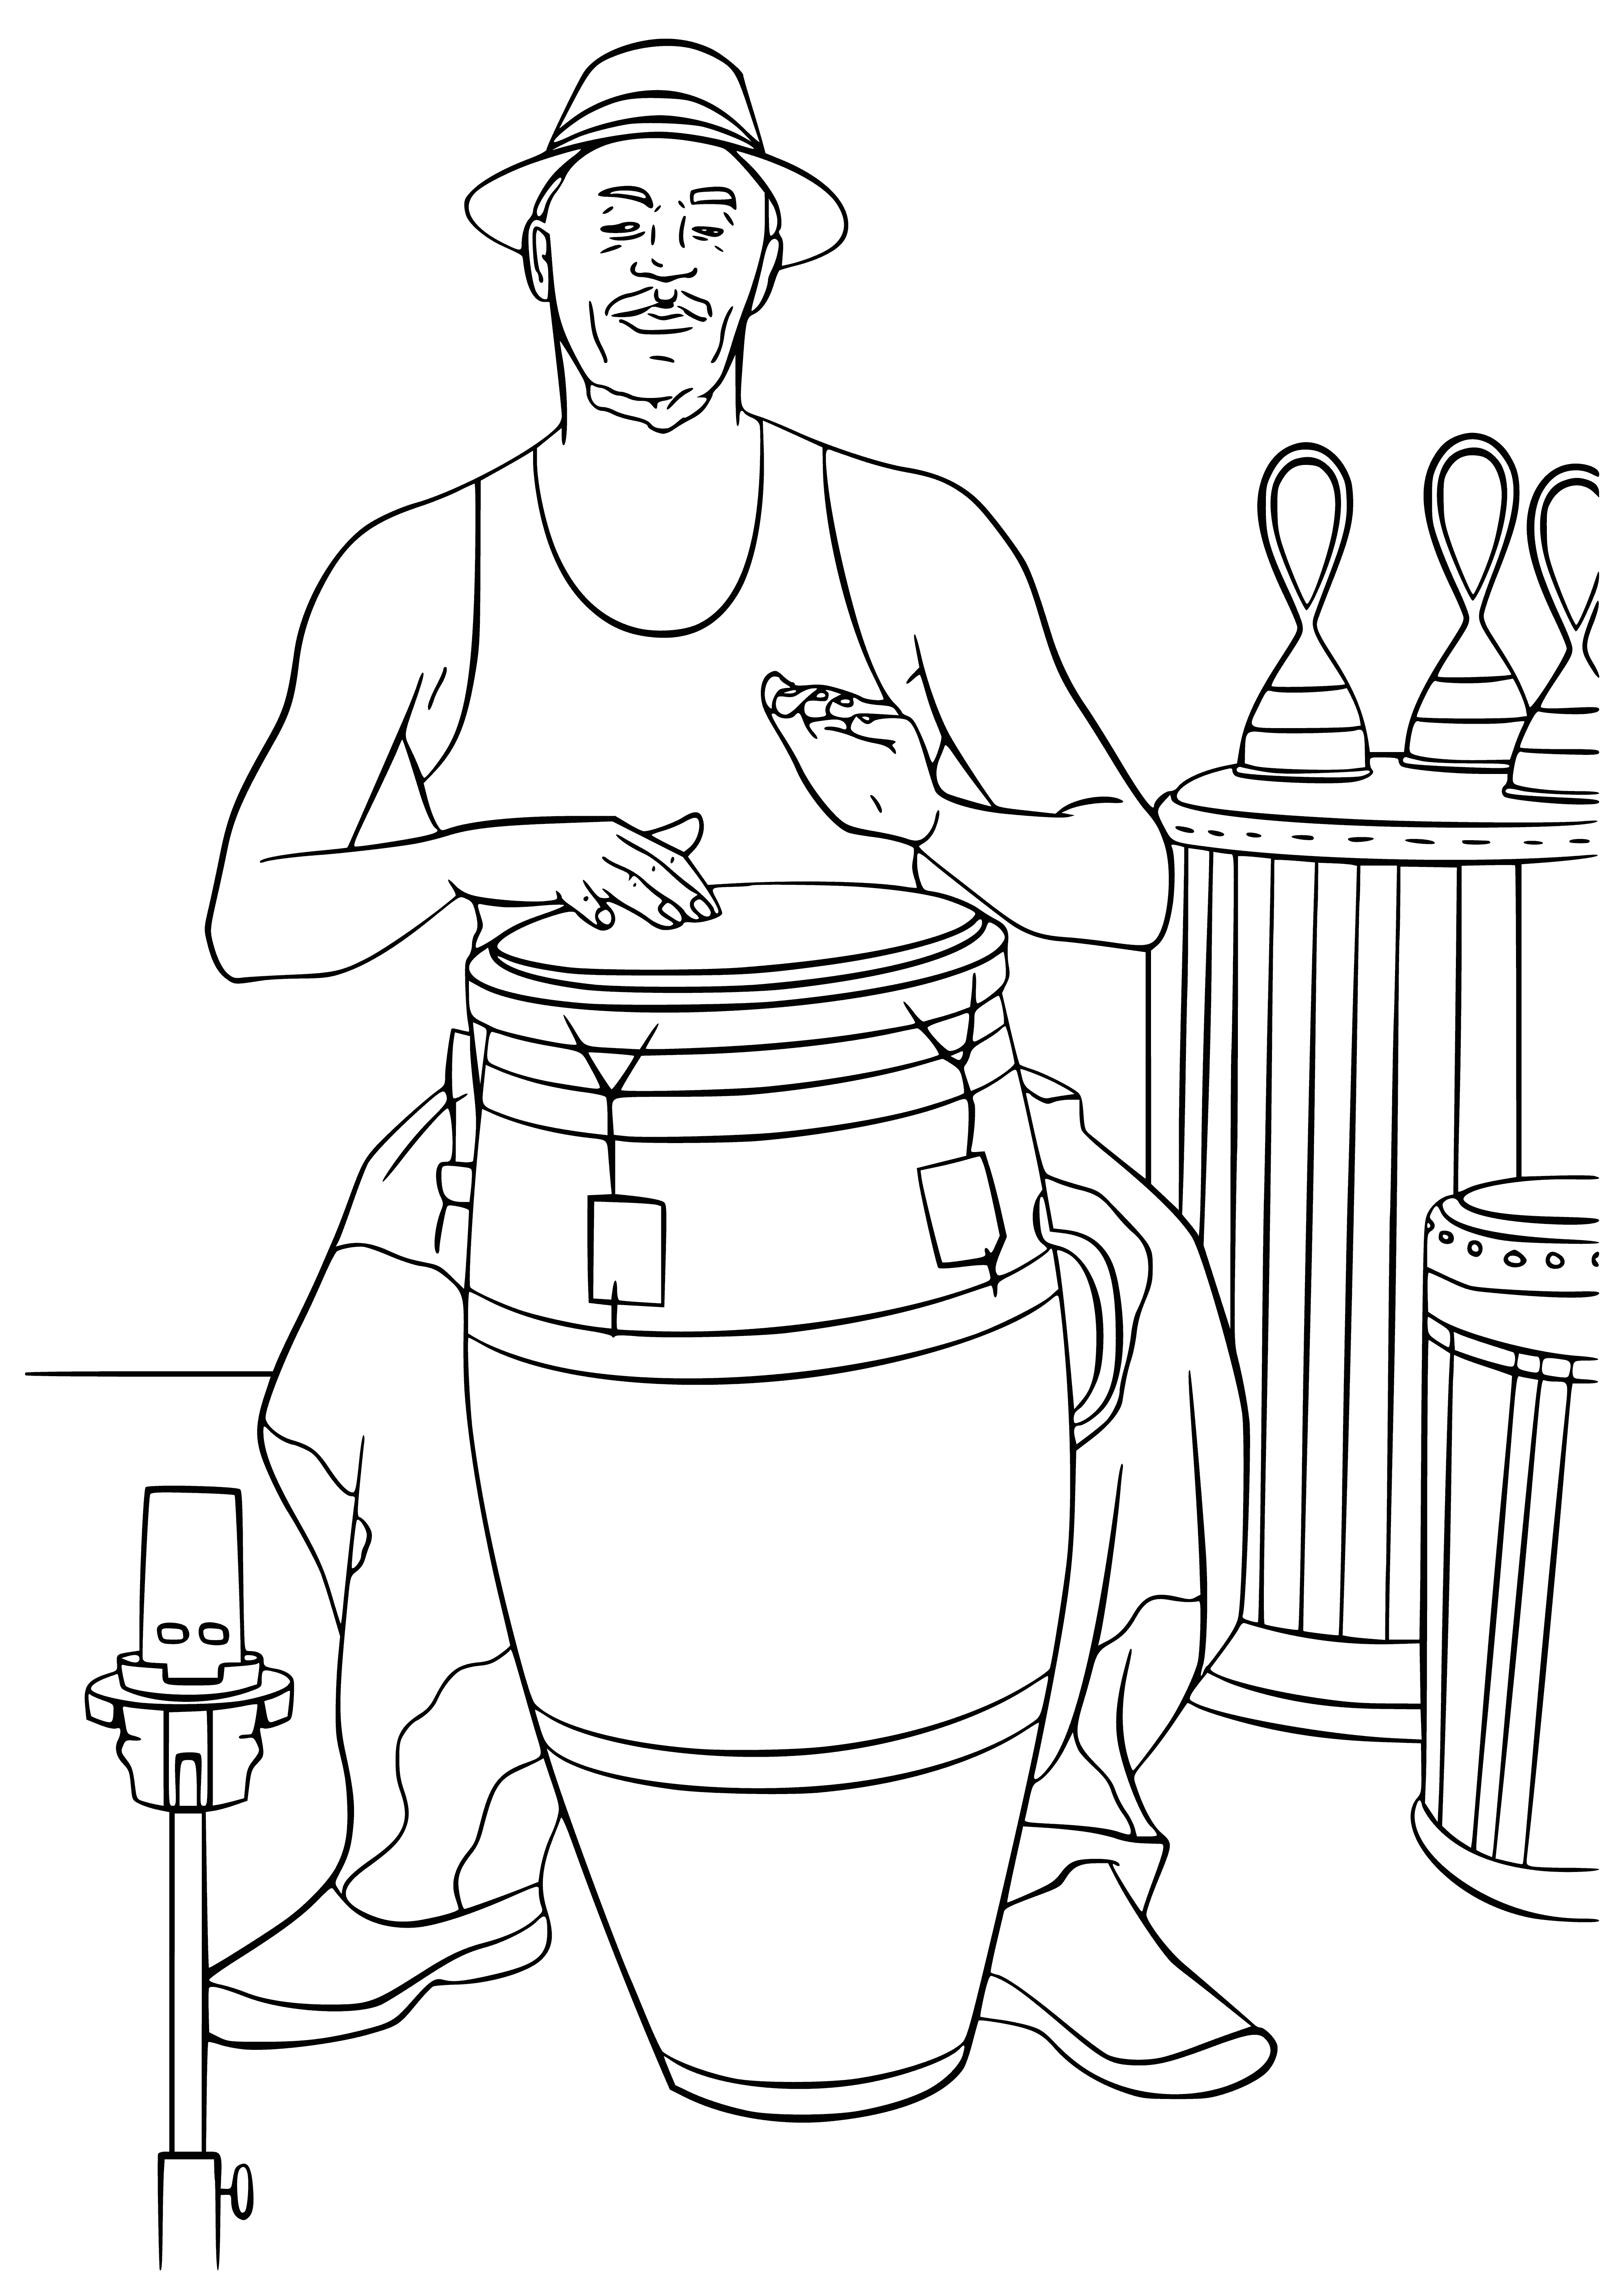 coloring page: Man in the coloring page plays the drums, wearing a black shirt & pants, with short black hair. #musicismylife